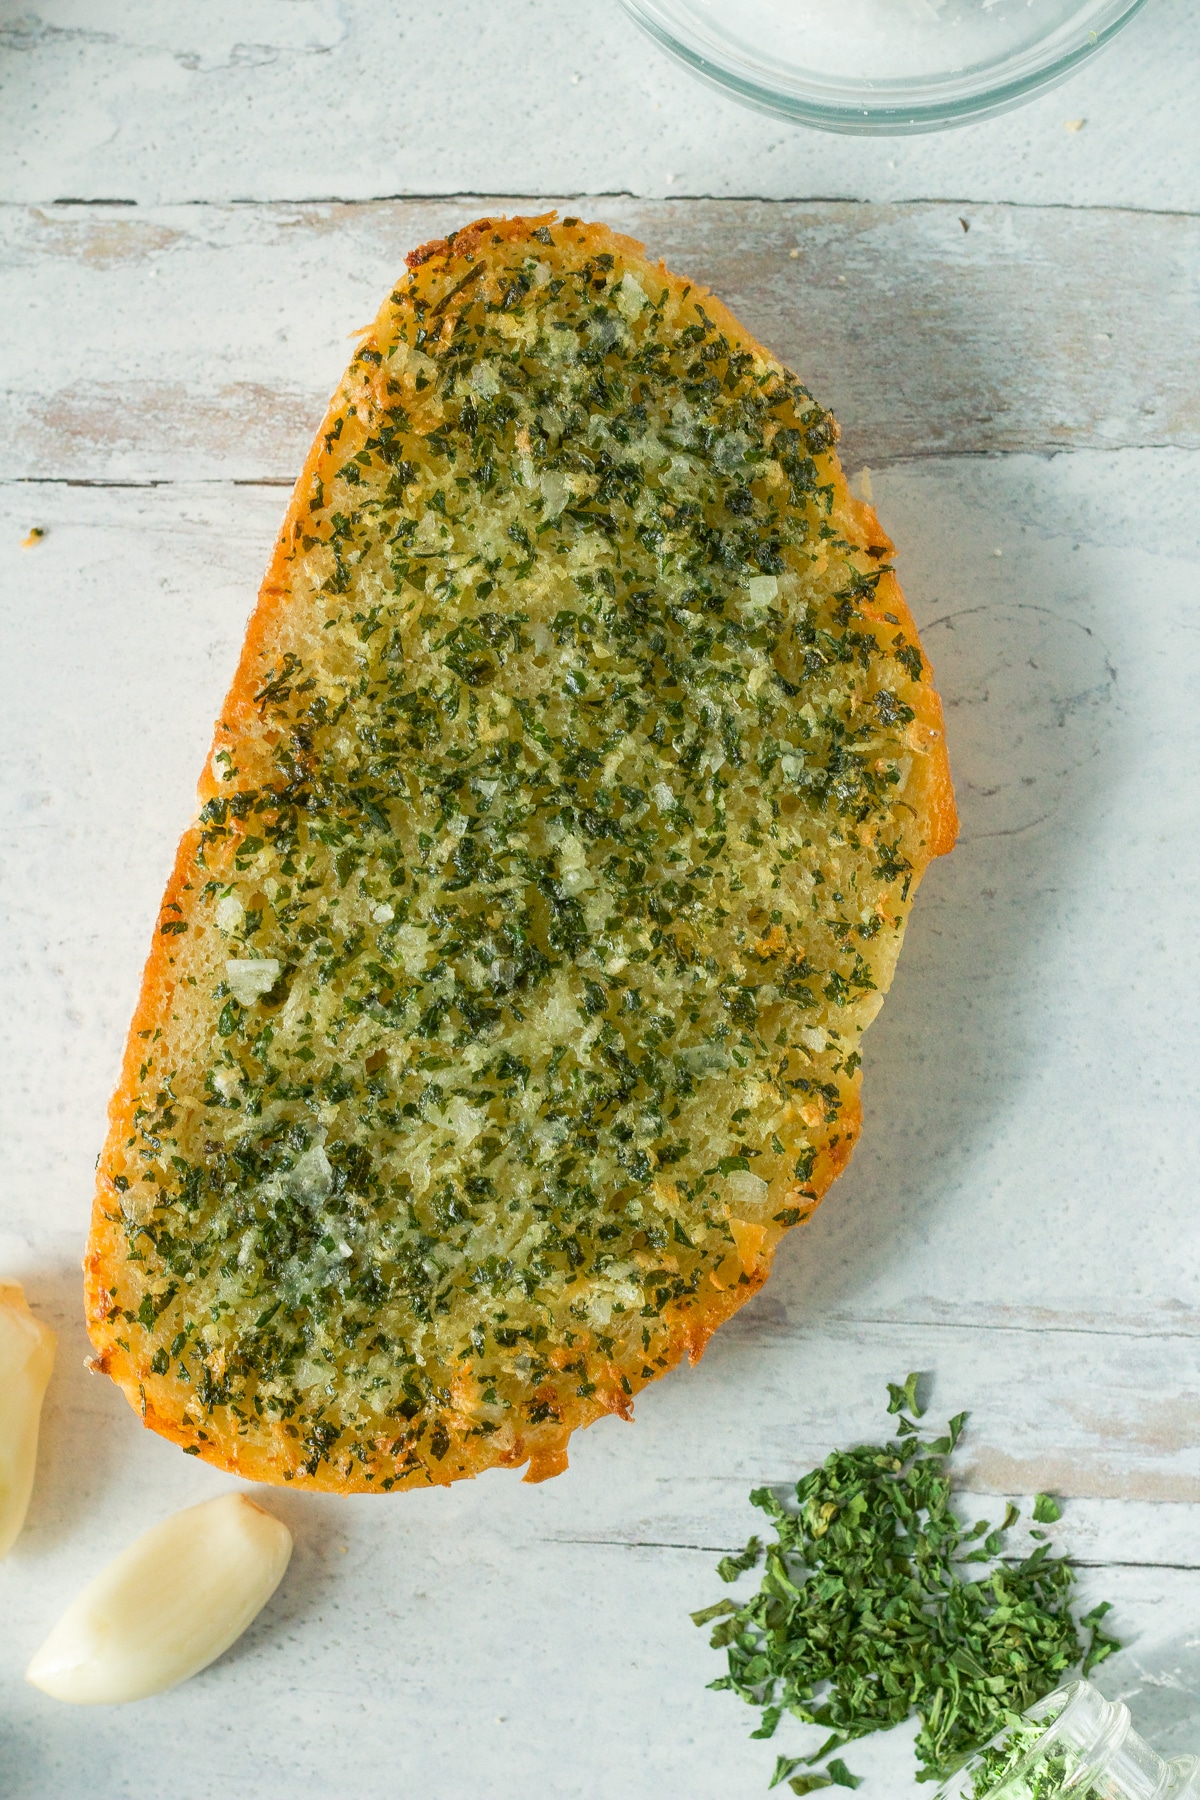 Garlic bread on board with garlic cloves and dried parsley around it.